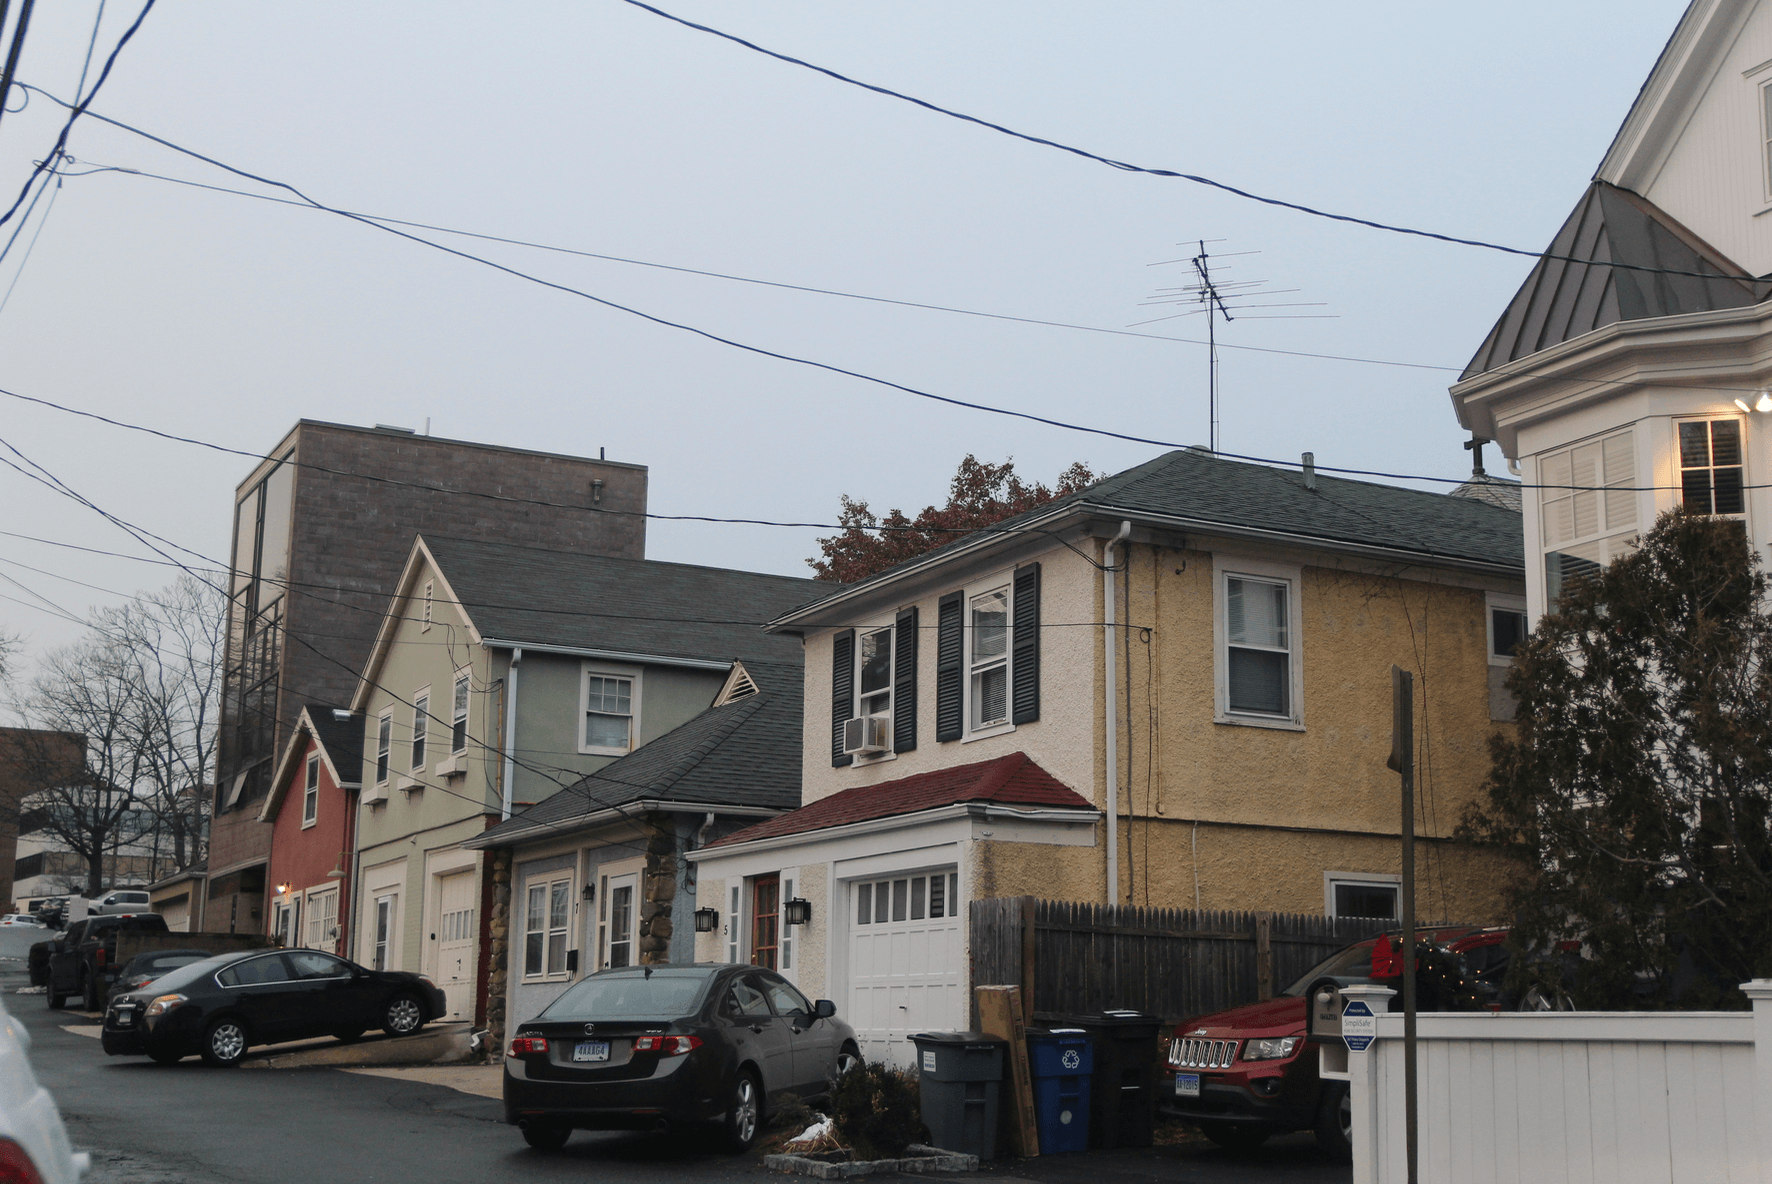 Houses on Benedict Court in central Greenwich. Photo: Leslie Yager